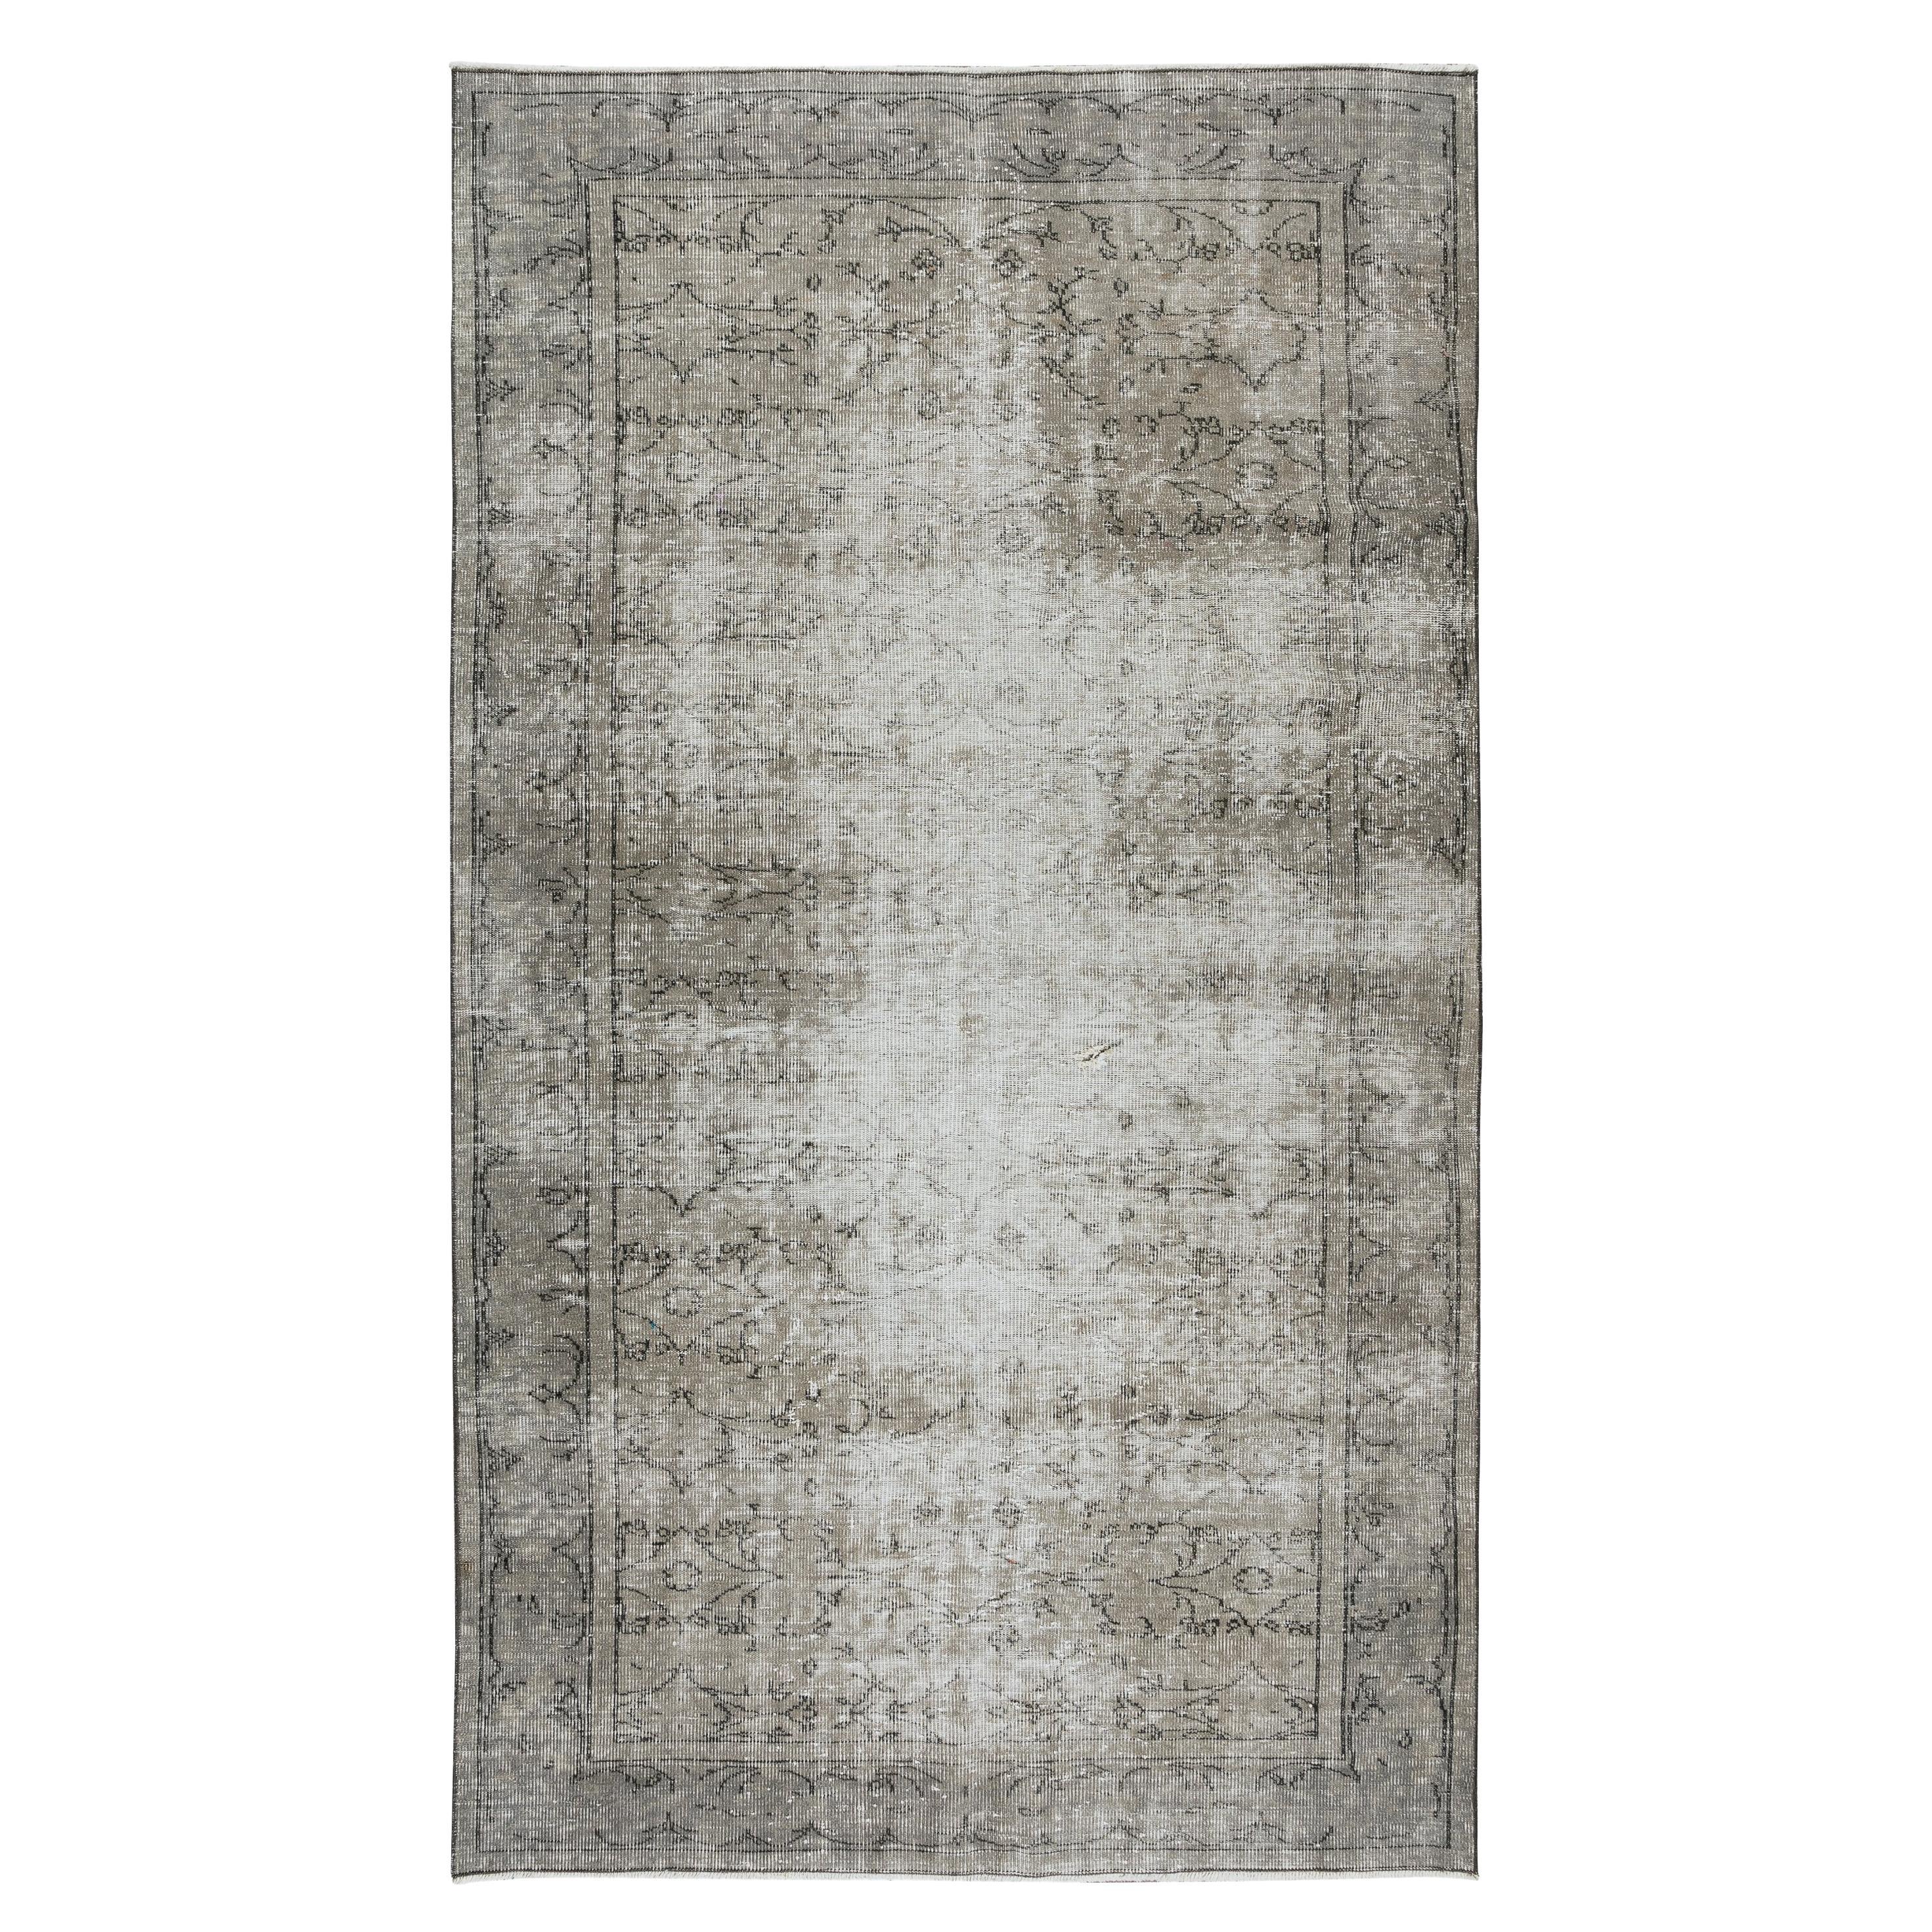 5.3x8.9 Ft Distressed 1950s Handmade Anatolian Area Rug Over-Dyed in Gray Color